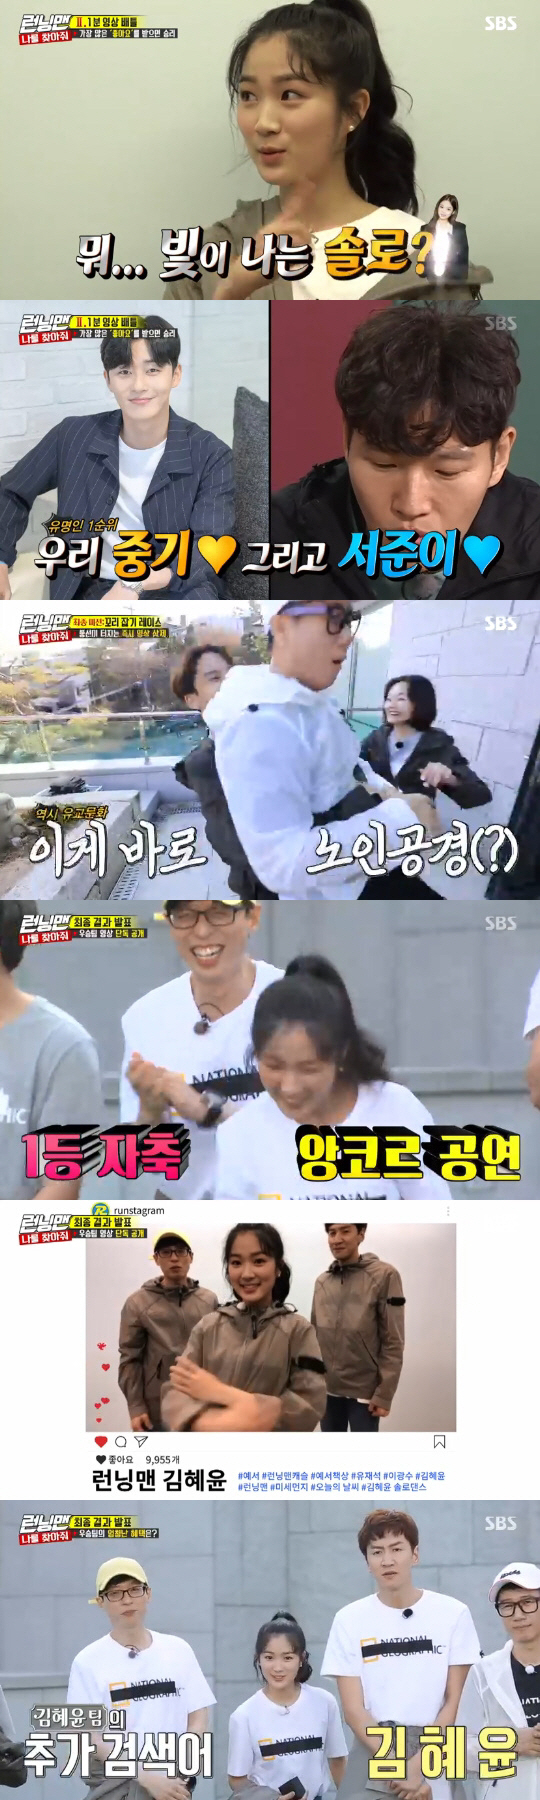 Kim Hye-yoon, Yoo Jae-Suk and Lee Kwang-soo won the championship.On SBS Running Man broadcasted on the afternoon of the 21st, Find Me Race, which will win the final winner, was held when it was the first place in real-time search terms.Guests included EXID Solji and Haniiiiiii, Seventeen Boo Seungkwan and Mingyu, actors Kim Hye-yoon and Haniiiiii Bo-reum.Two members of Running Man and a guest teamed up to win the final match by using the first place in real-time search terms on each portal site from 5 pm to 12 pm on the day.The first real-time search word to challenge each team is Running Man + Guest Name.In favor of teaming with guest with the most likely search terms, Song Ji-hyo and Jeon So-min have the advantage of Seventeen Boo Seungkwan and Min Kyu, Yoo Jae-Suk and Lee Kwang-soo have the Kim Hye-yoon, Kim Jong-kook and Yang Se-chan have the Haniiiiii Bo-reum, Ji Suk-jin and He teamed up with Haha Solji and Haniiiiiii.Then, a real-time search word war was held in earnest. The first round of the show is the first time in each era. Each team replays the drama scenes presented and gets the right answer.Each team has stepped out desperate to avoid a super-large water bomb penalty.Especially, Celebrity Odintsovo Kim Hye-yoon showed off his dance skills hidden to get the right answer.He stepped out confidently every time the song came out, but he caused laughter with a sloppy movement.Yoo Jae-Suk said, I thought I was doing well. Kim Jong-kook said, Is not it a Bebeto cradle ceremony during the World Cup?After a fierce confrontation, Haniiiiii Bo-reum, Kim Jong-kook and Yang Se-chan won the first round, and they benefited from putting the phrase Running Man Haniiiiii Bo-reum on the top of the screen.While the last of the teams, Solji and Haniiiiiii, Ji Suk-jin and Haha, were penalized for super-large water bombs.The round was followed by a team promotional video within one minute for each team and uploaded to the Running Man official SNS account, and the team that received the most favored team won the championship.Kim Hye-yoon team once again relied on the dance skills of Kim Hye-yoon, a former broadcasting dance group, and the EXID team planned a reverse direct cam video.The Seventeen team decided to show Onana Dance, and the Haniiiiii Bo-reum team decided to make a video call with a celebrity using Kim Jong-kooks golden connections.The video taken by each team was uploaded to Running Man SNS, and the members played the final round Take the tail.As soon as the balloons with each team tail burst, the teams entire One will be deleted not only in the Race In-N-Out Burger but also the promotional video posted on SNS.Also, even if you survive the tail-catching race, if you have less likes of the video, the championship goes to another team.Each team tail avoided the other team that chased them, but Kim Hye-yoon was the first to be caught by Kim Jong-kook and was in-N-Out Burger.Song Ji-hyo was also trying to avoid Ji Suk-jin and Haha, but the balloon was scratched on the wrong tree and the balloon was blown up.Eventually, the remaining Haniiiiii Bo-reum team won another championship.But first, the video of the In-N-Out Burgered Kim Hye-yoon team won the final with the highest number of likes with 2,3061.On the other hand, the final winner, who decides to count real-time search terms on the day, will be released on May 5th.